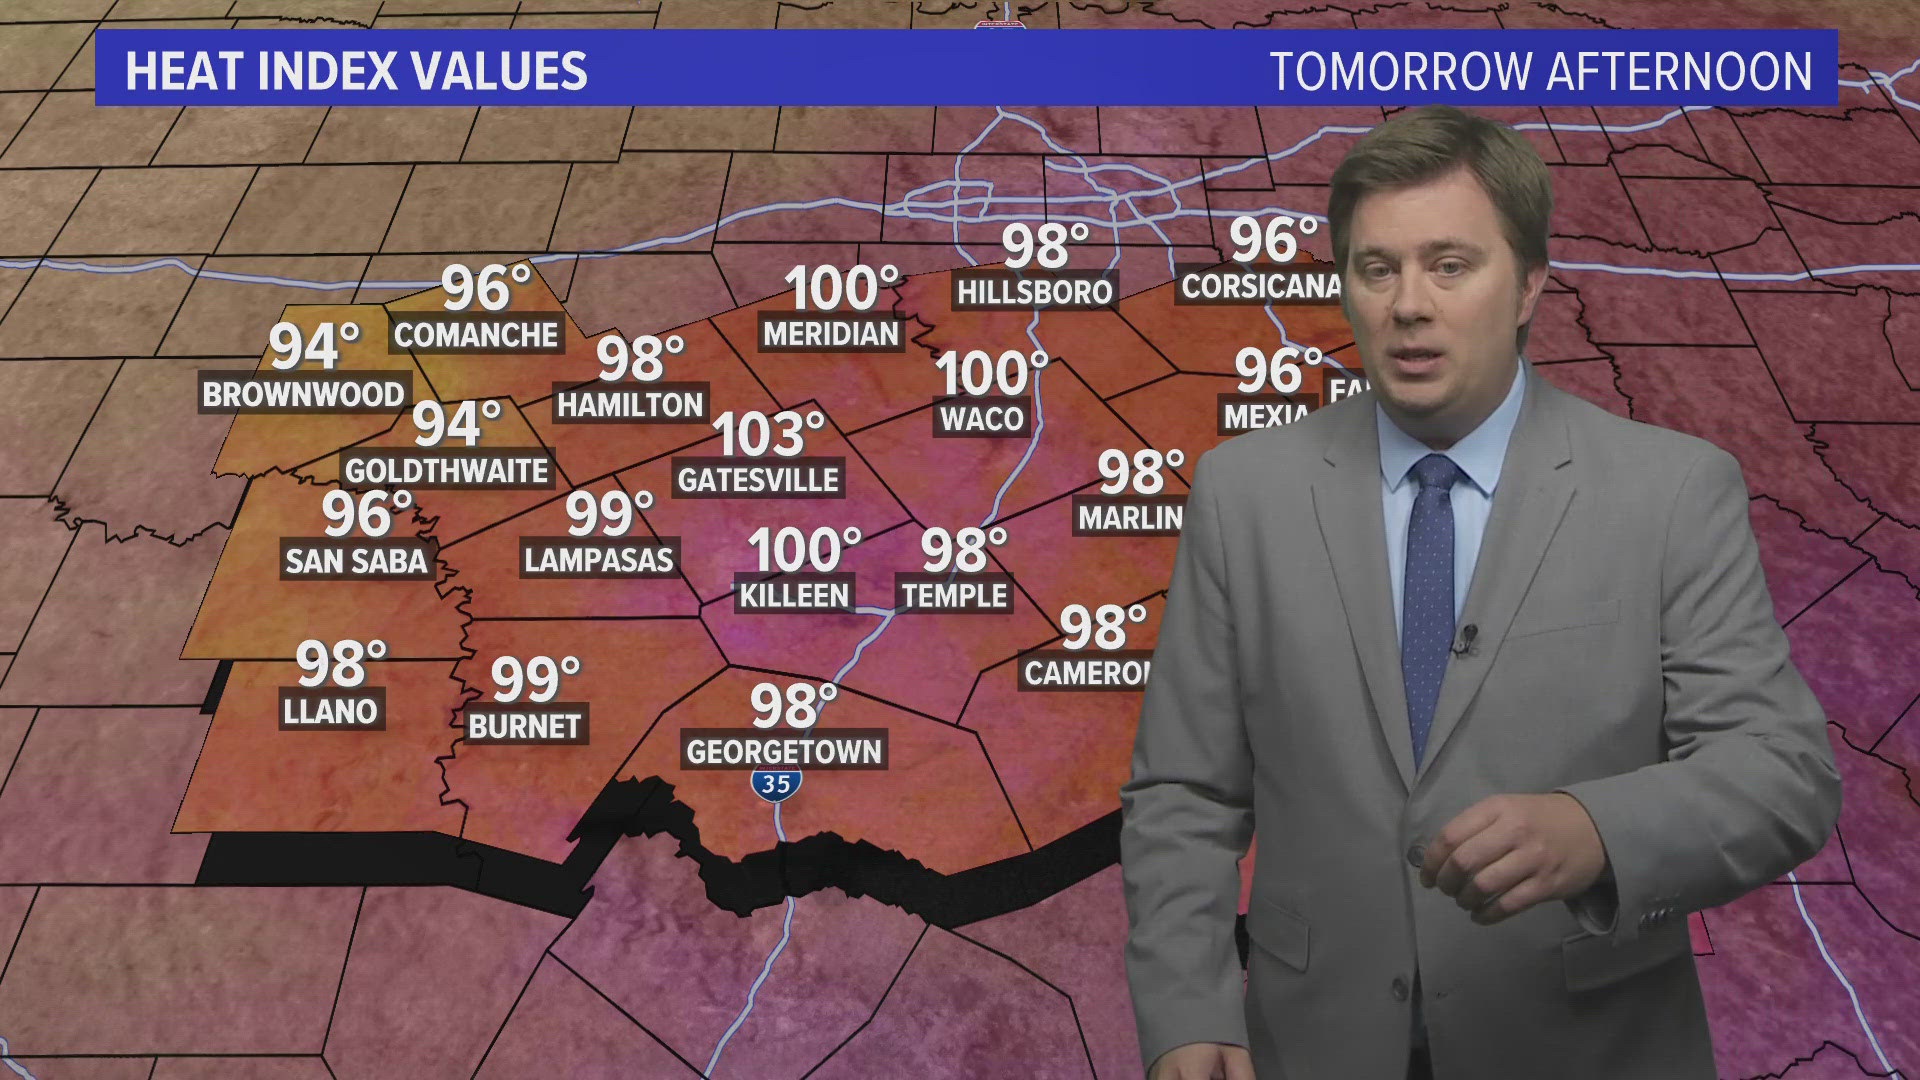 Temperatures will climb into the lower 90's with heat index values near 100° tomorrow. The afternoon could bring strong storms back to the area as well.